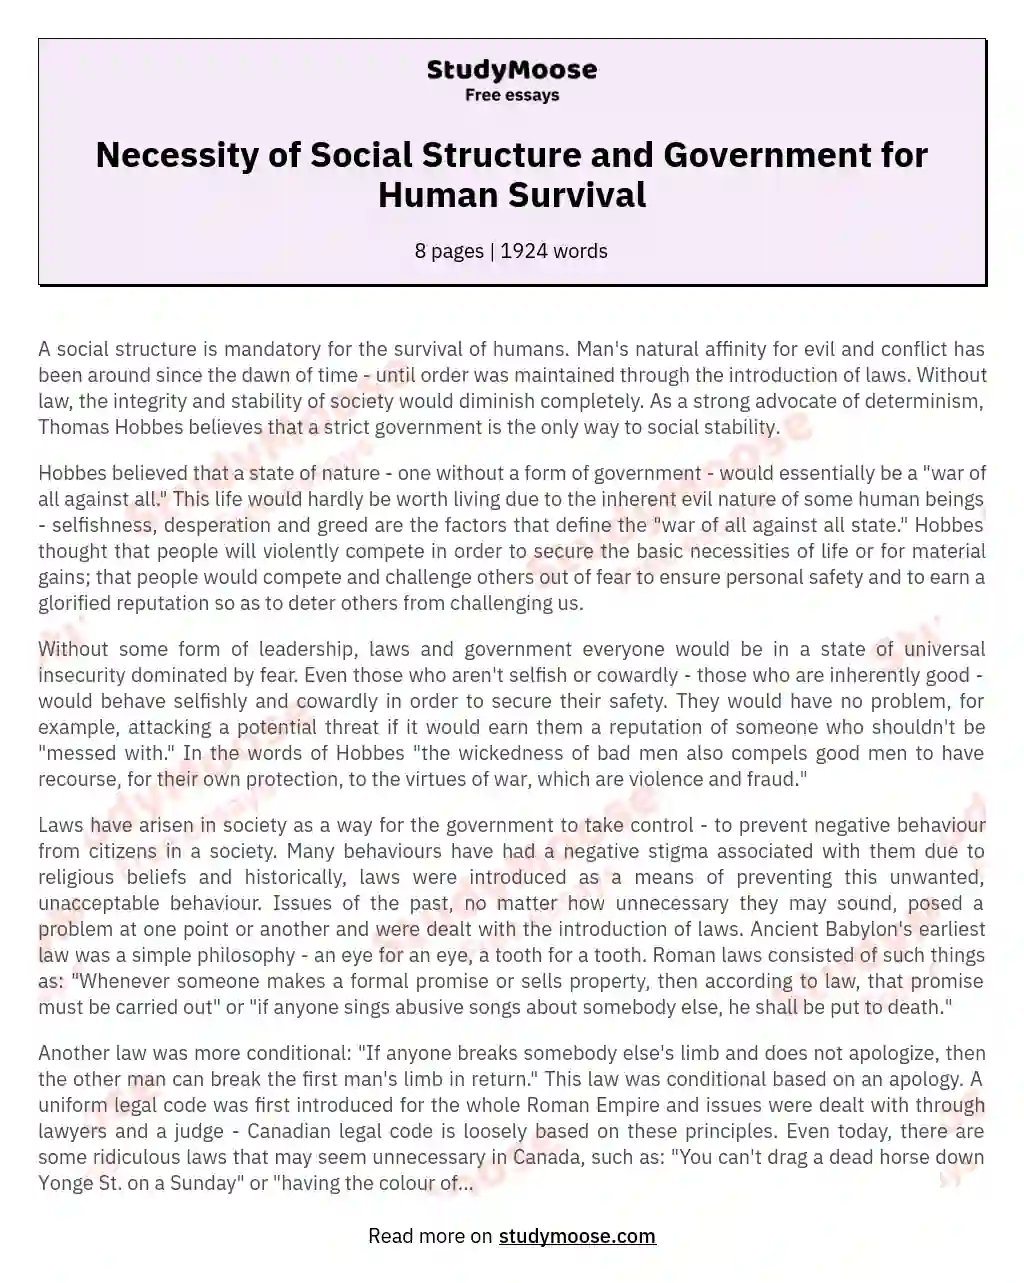 Necessity of Social Structure and Government for Human Survival essay